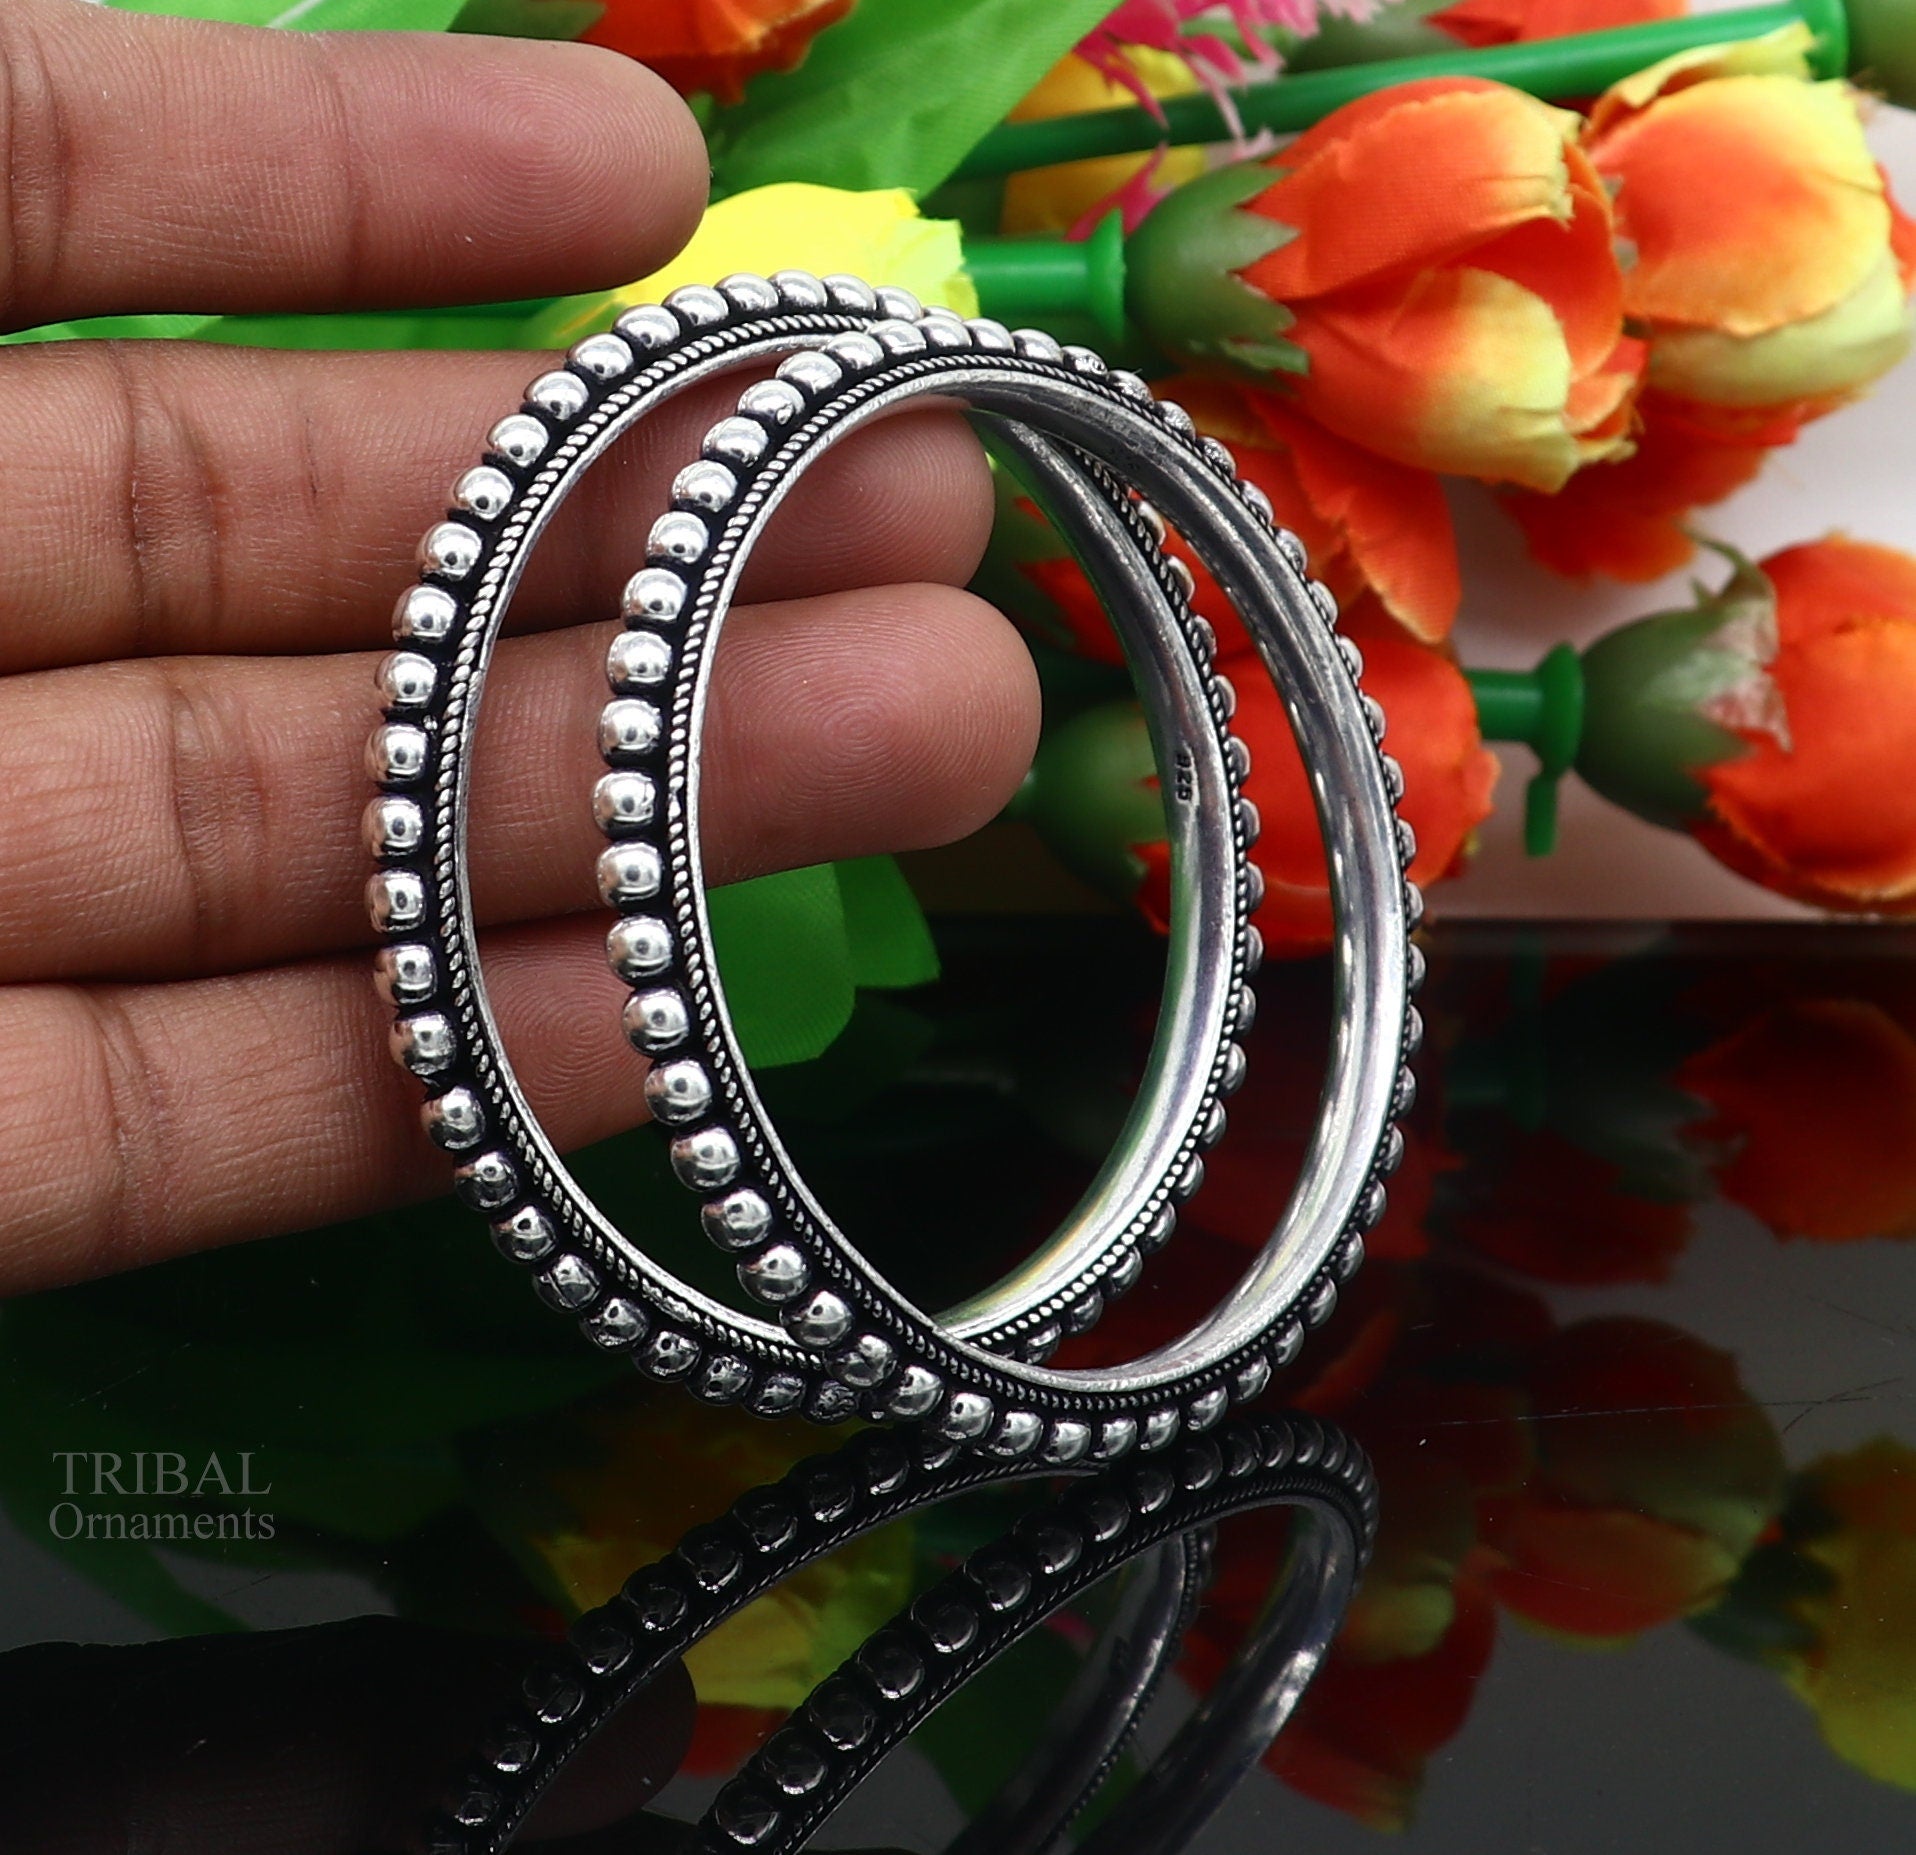 925 sterling silver amazing silver beaded bangle bracelet, excellent custom made oxidized personalized bangle jewelry for belly dance nba273 - TRIBAL ORNAMENTS